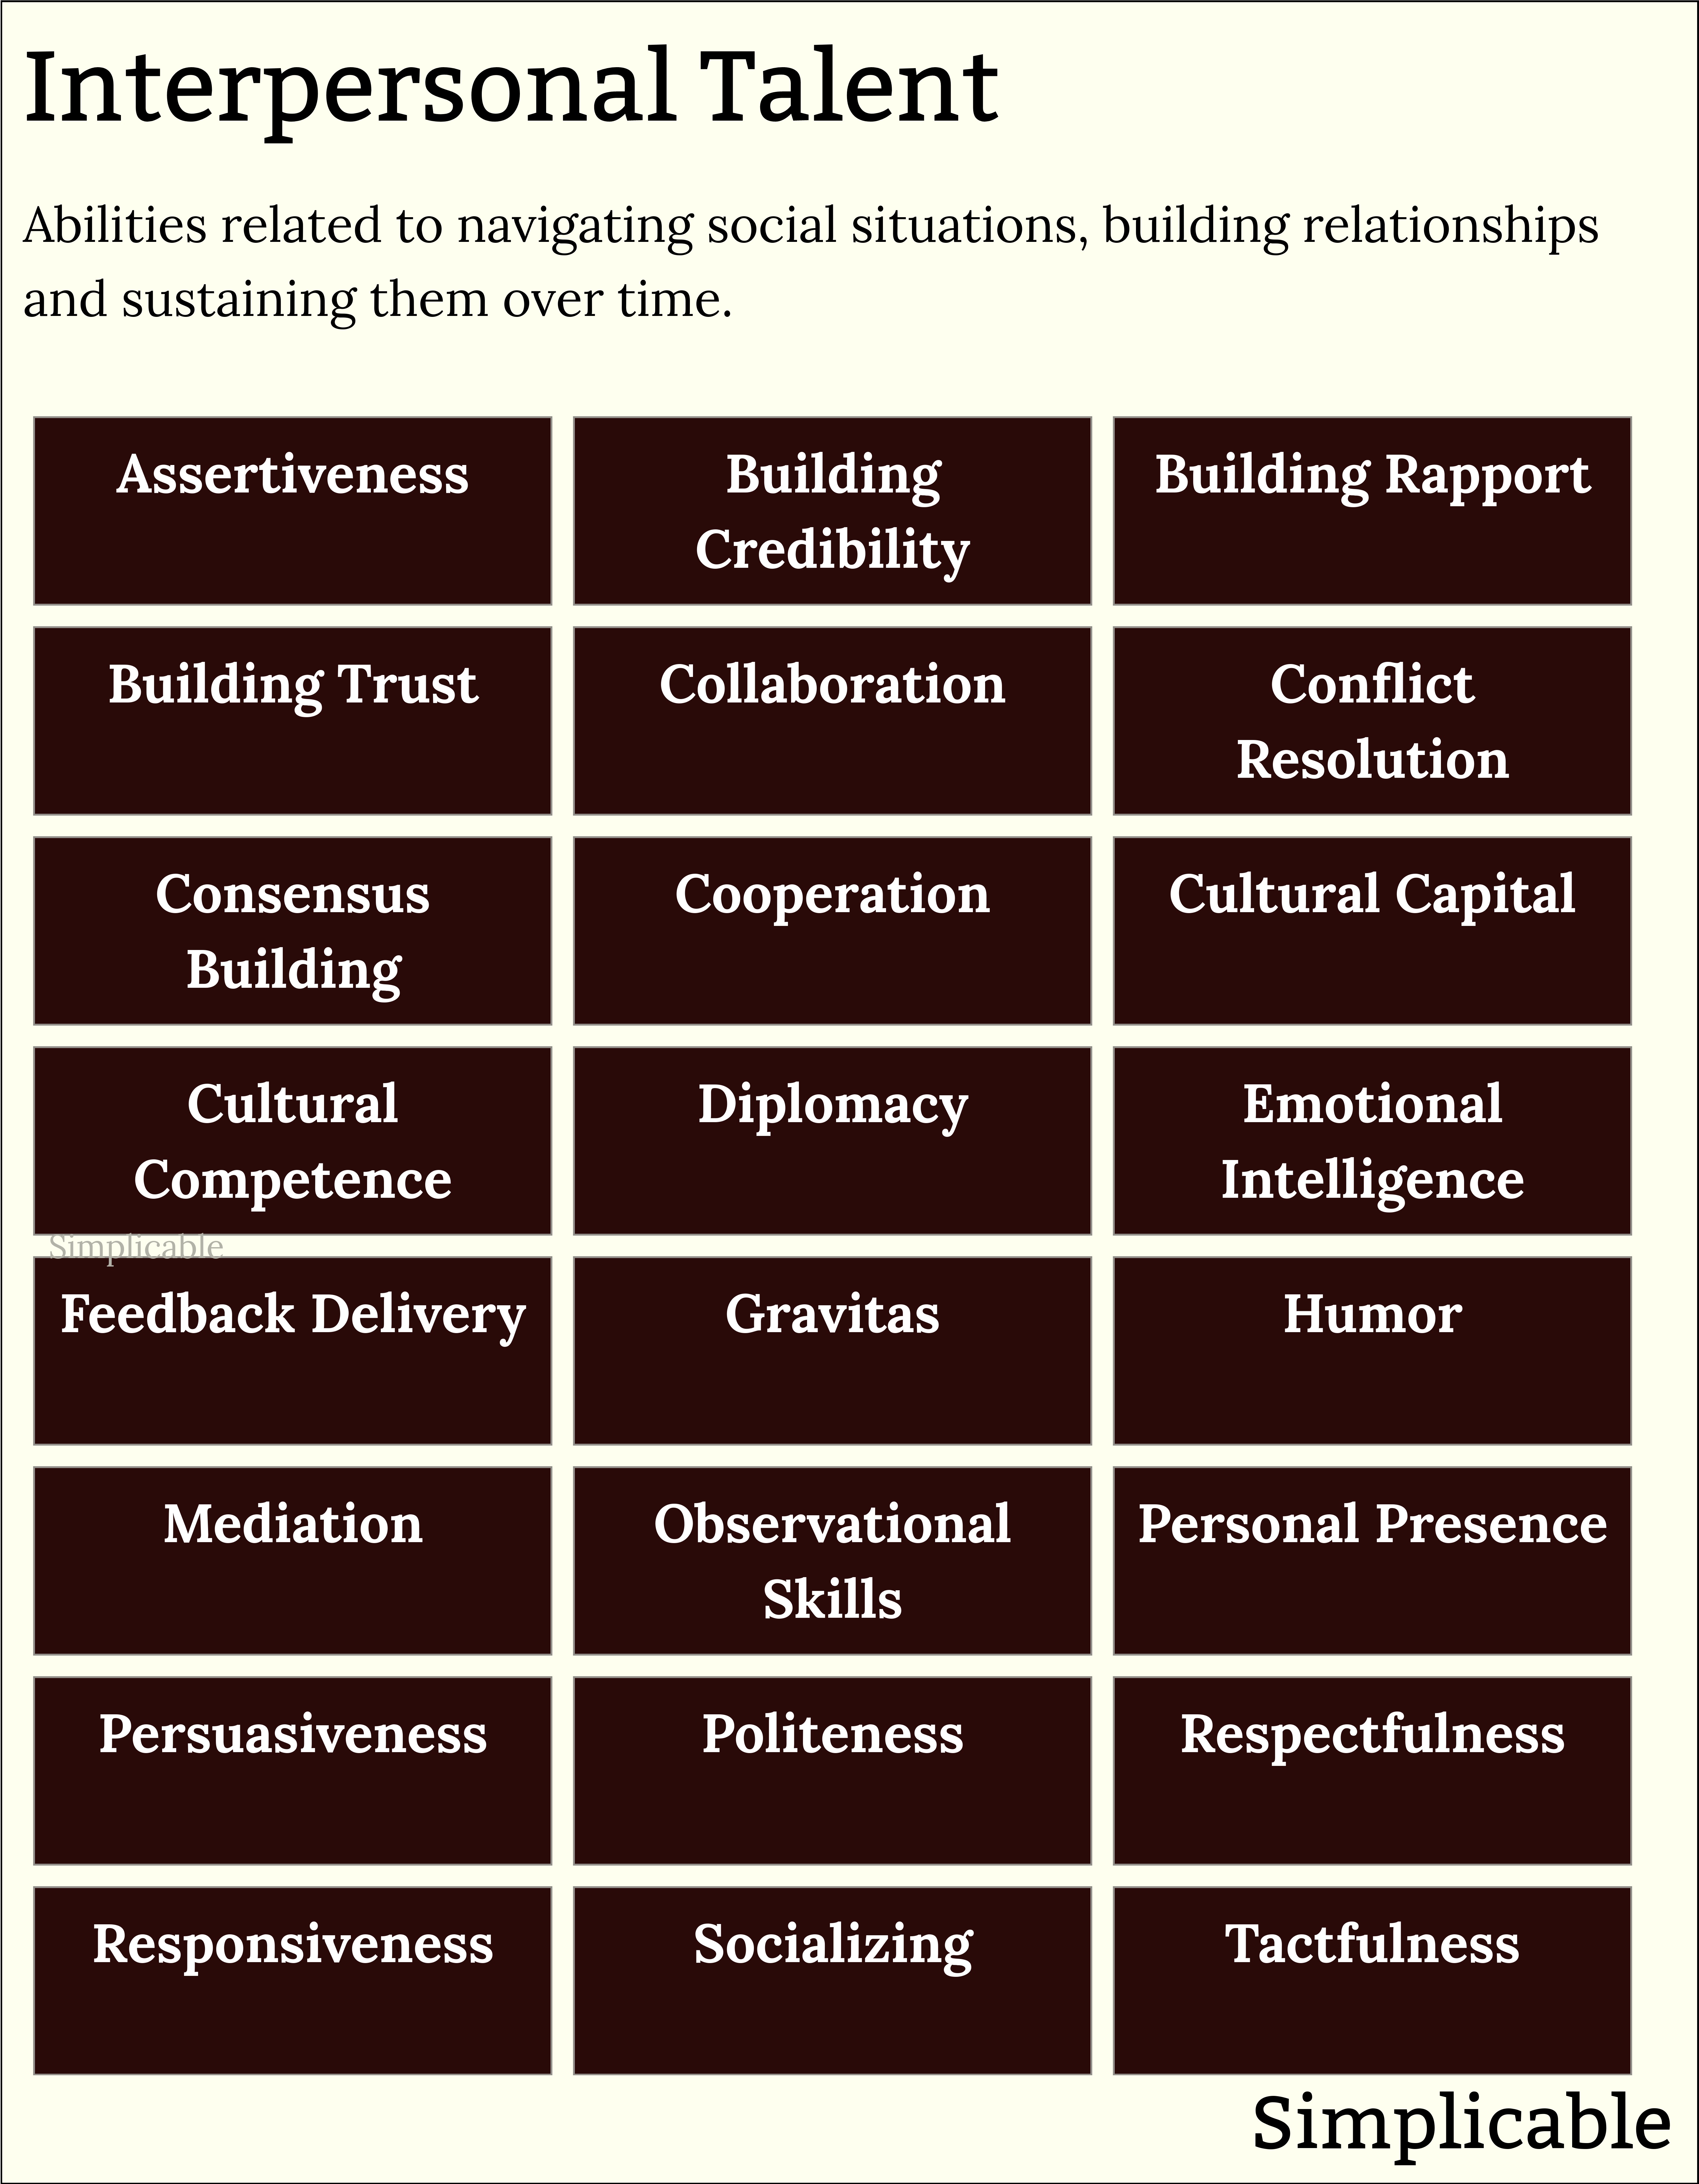 types of interpersonal talent